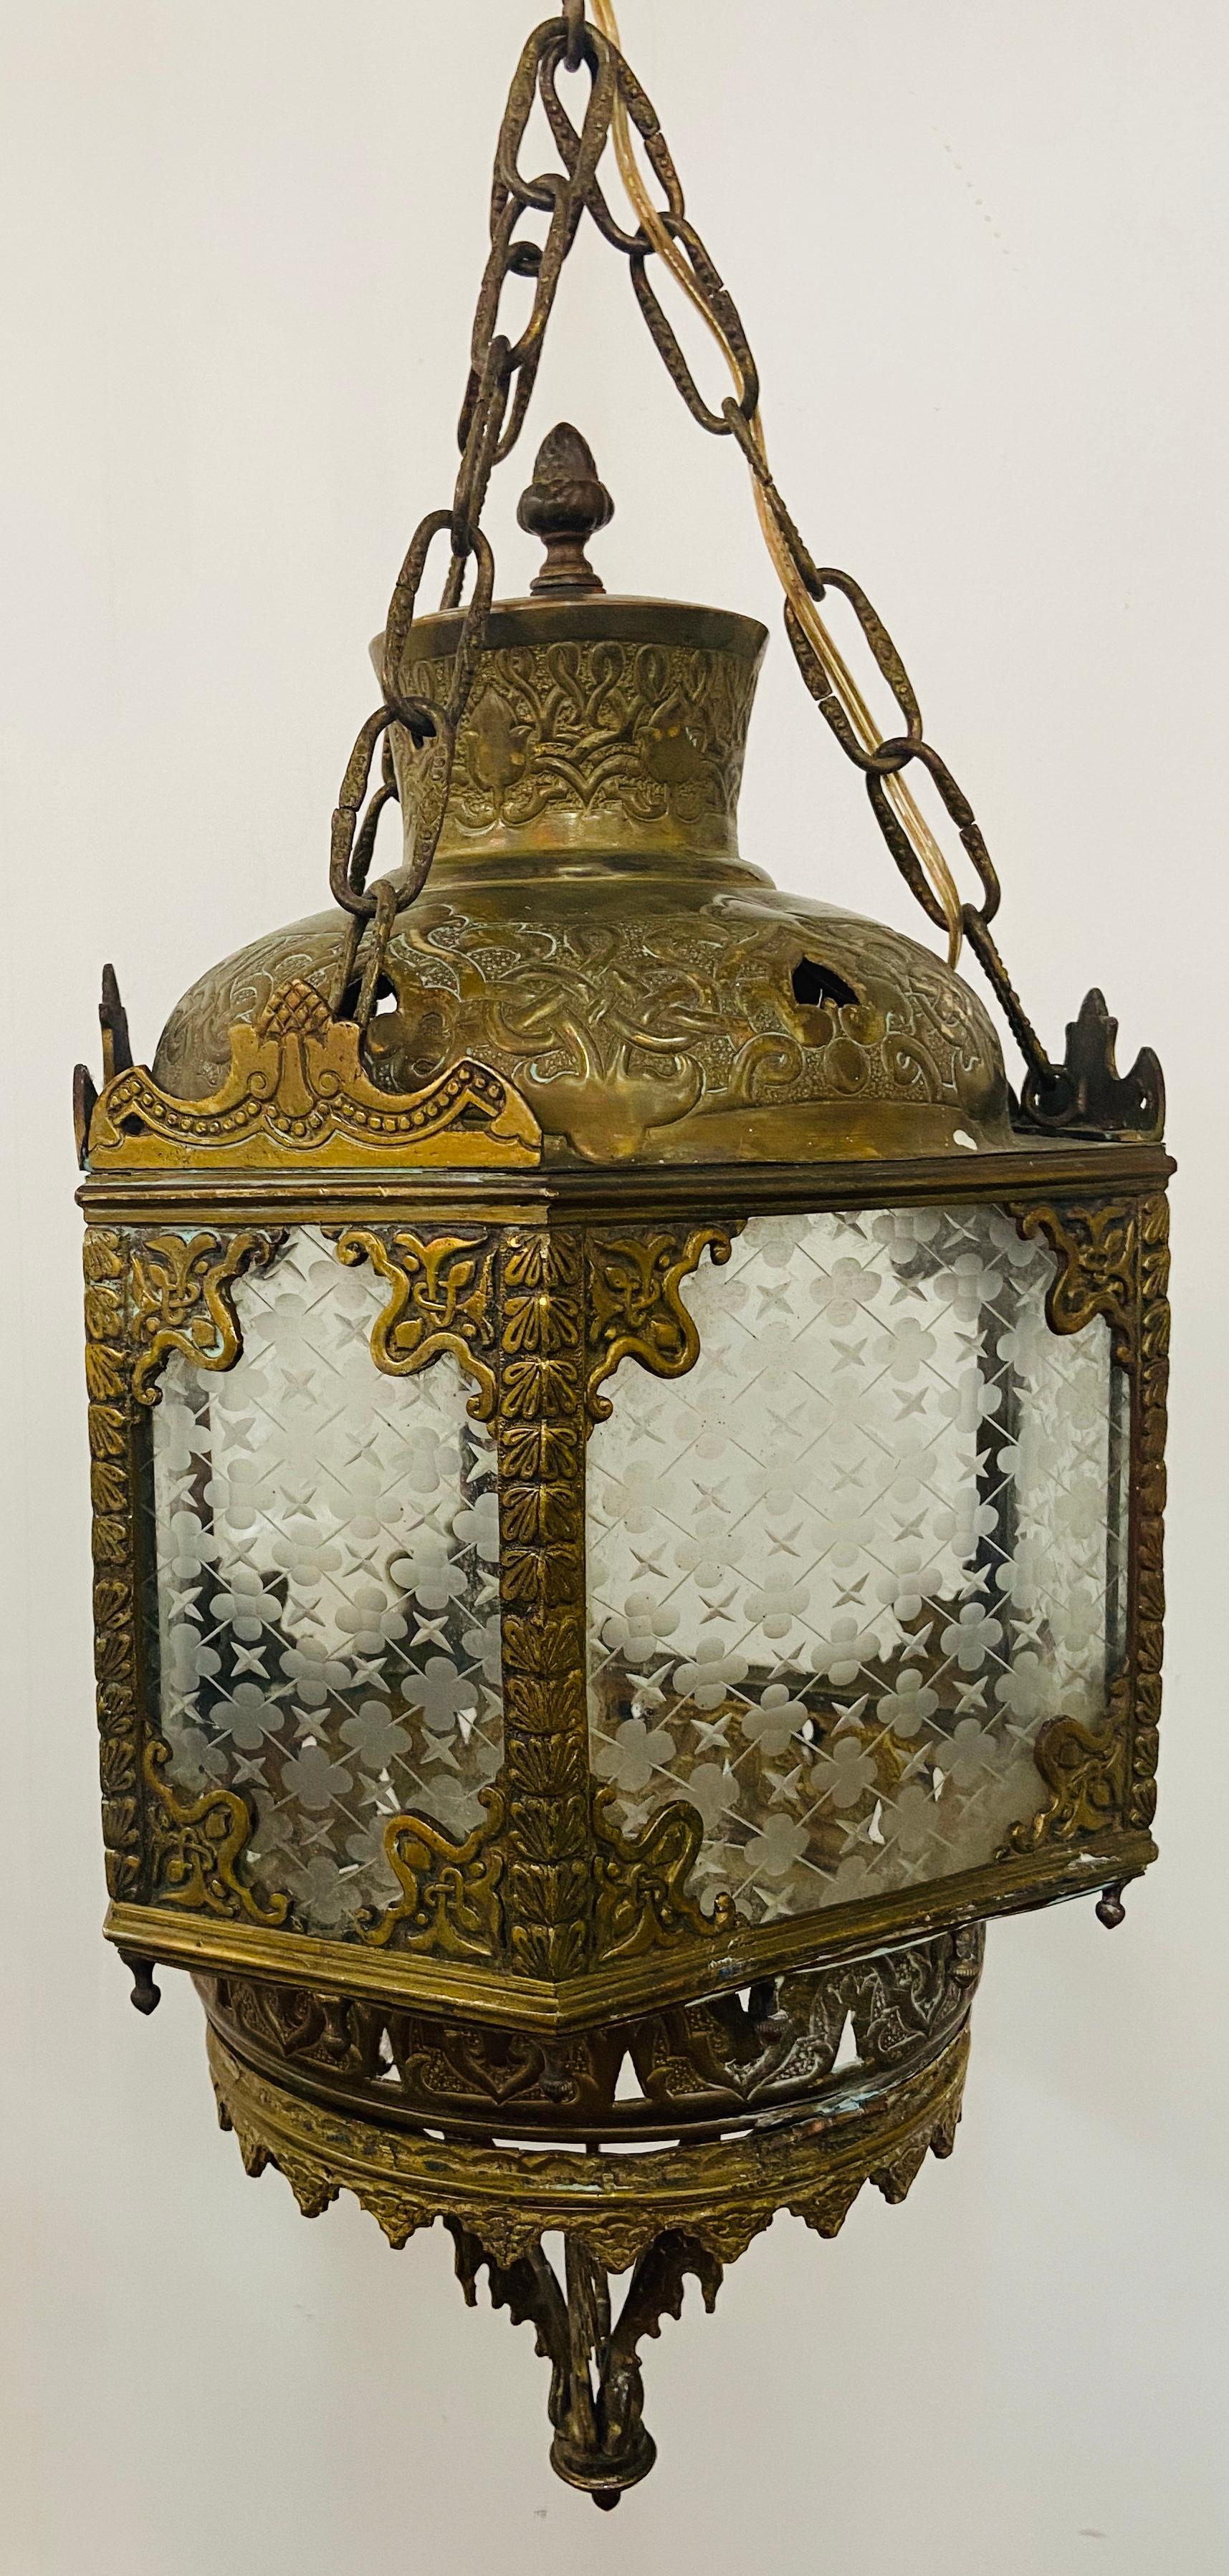 A fine antique English gilt bronze lantern featuring 6 panels with original handout glass. The glass panels are beautifully decorated with stars and clover leaf motifs. The hexagonal shaped hanging lanterns is a classy addition to your hallway or